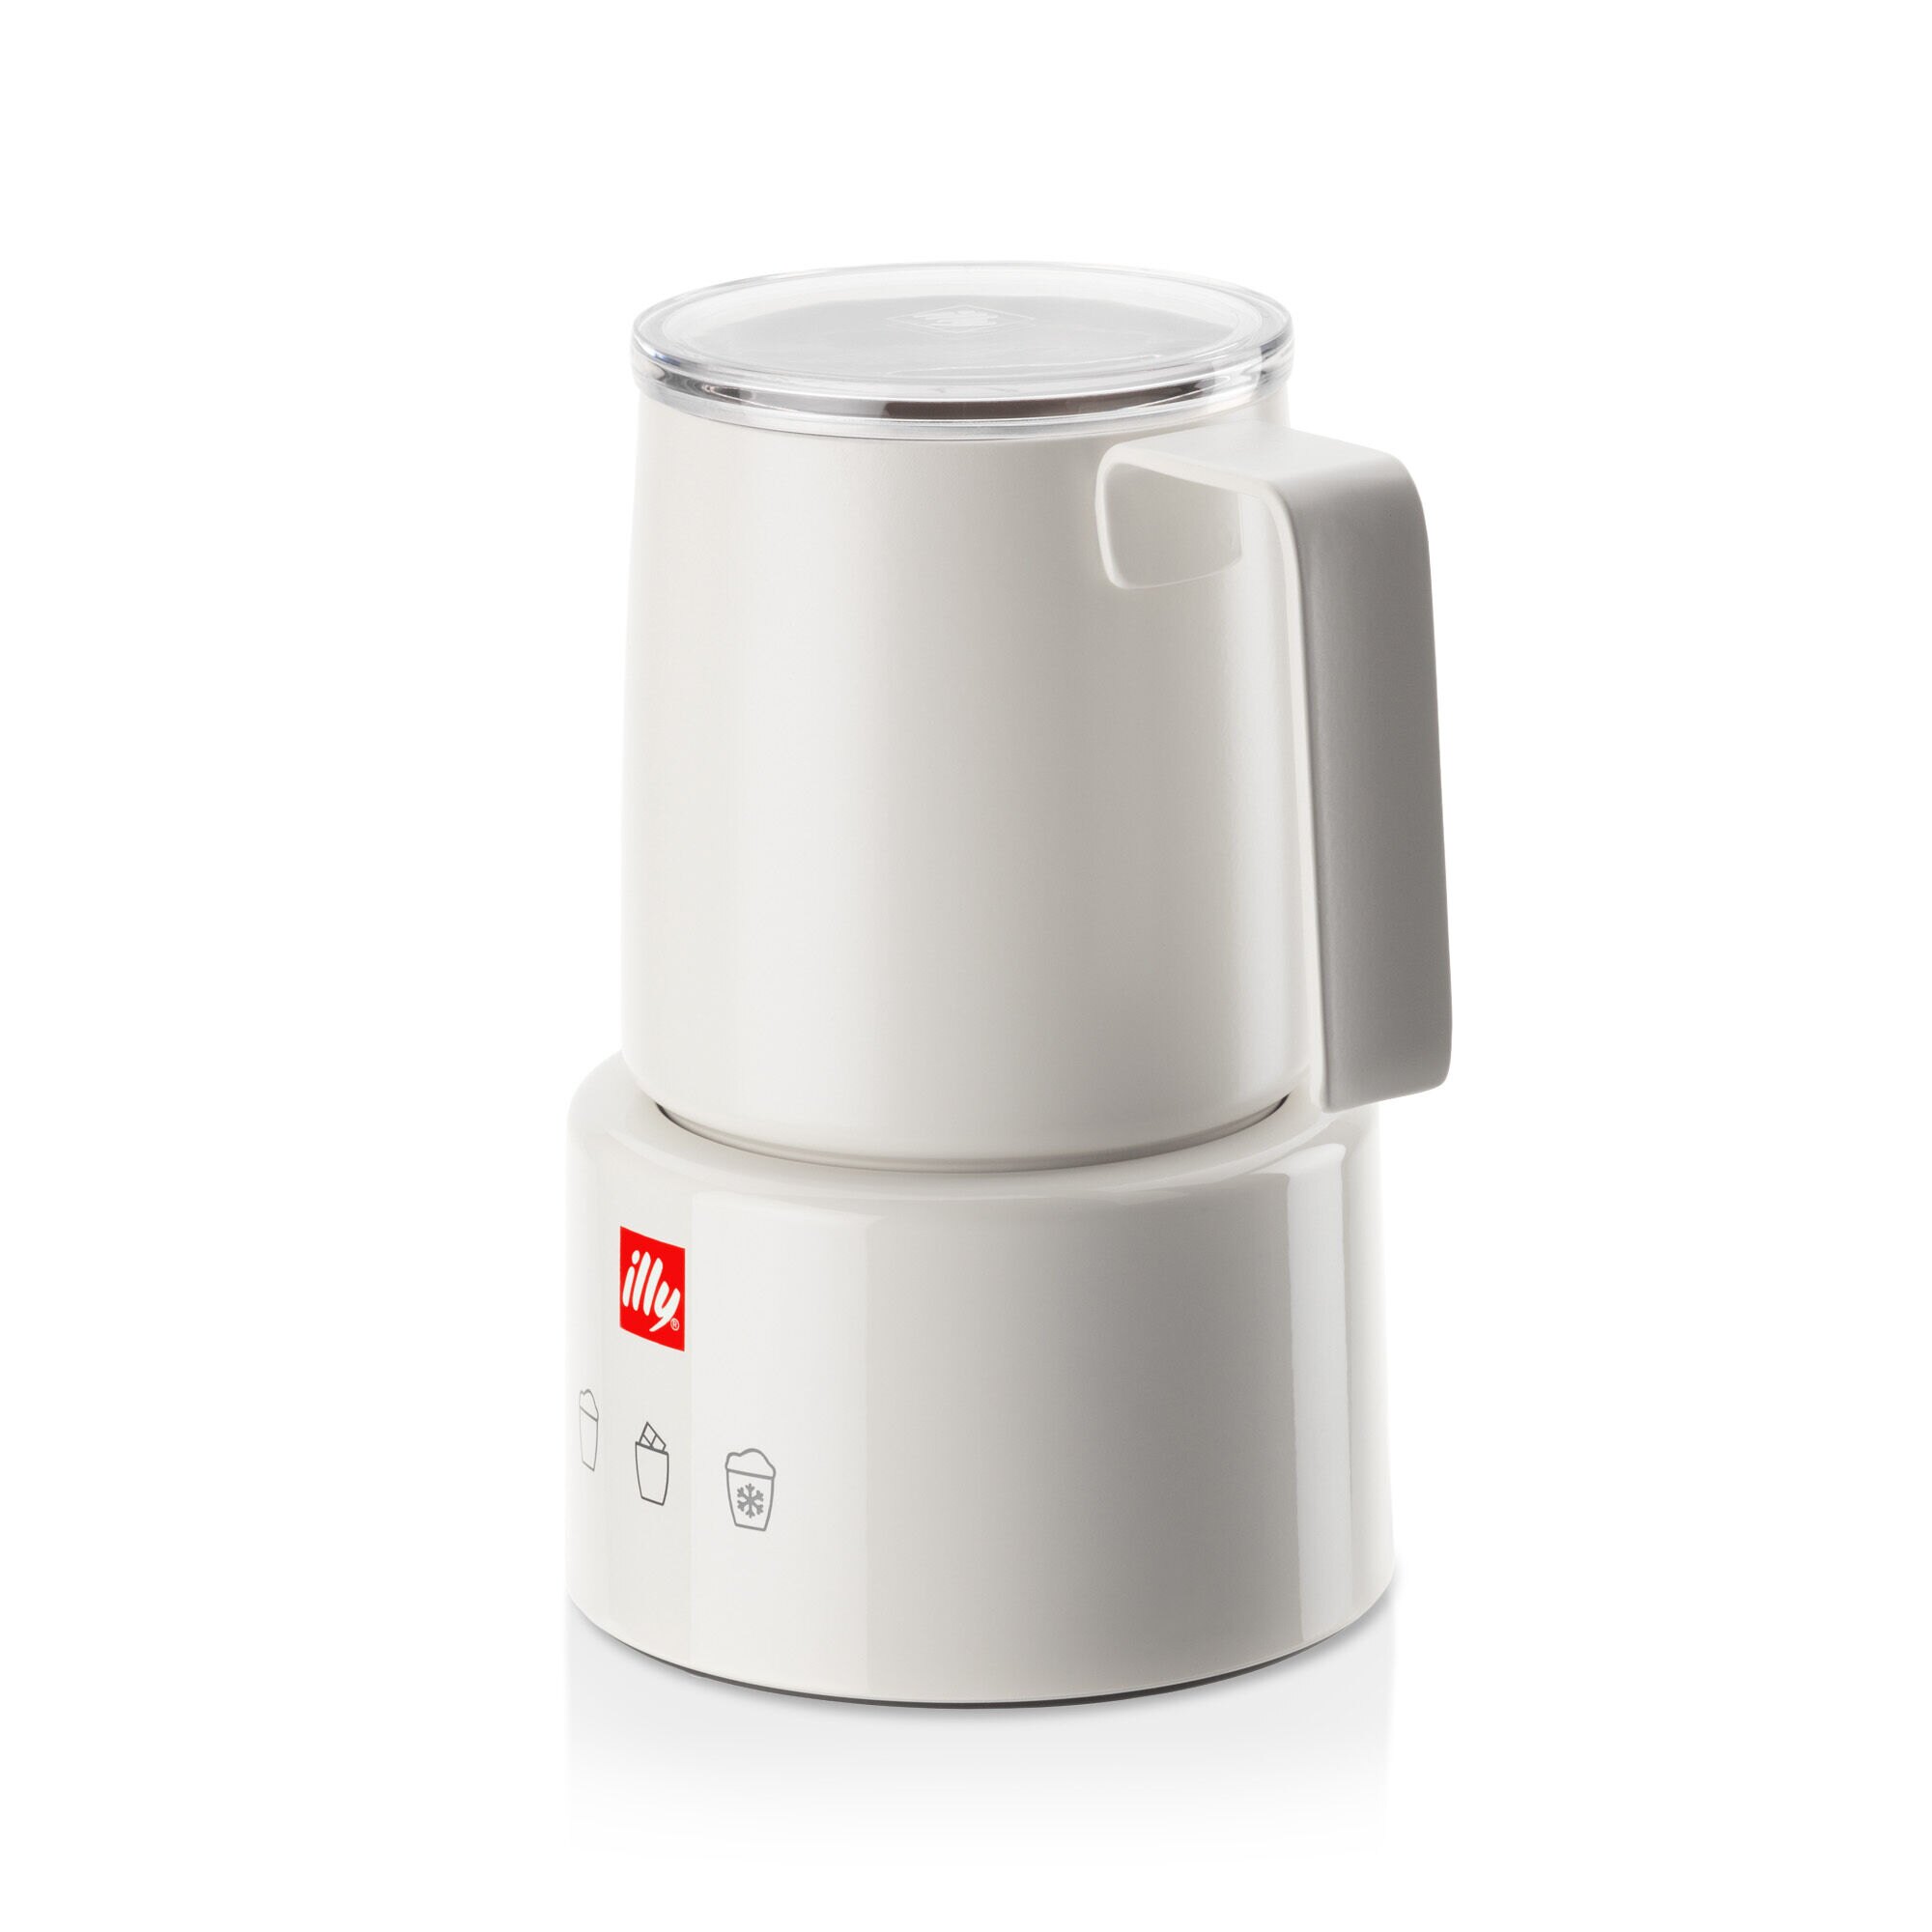 illy white electric milk frother - Esprit Café